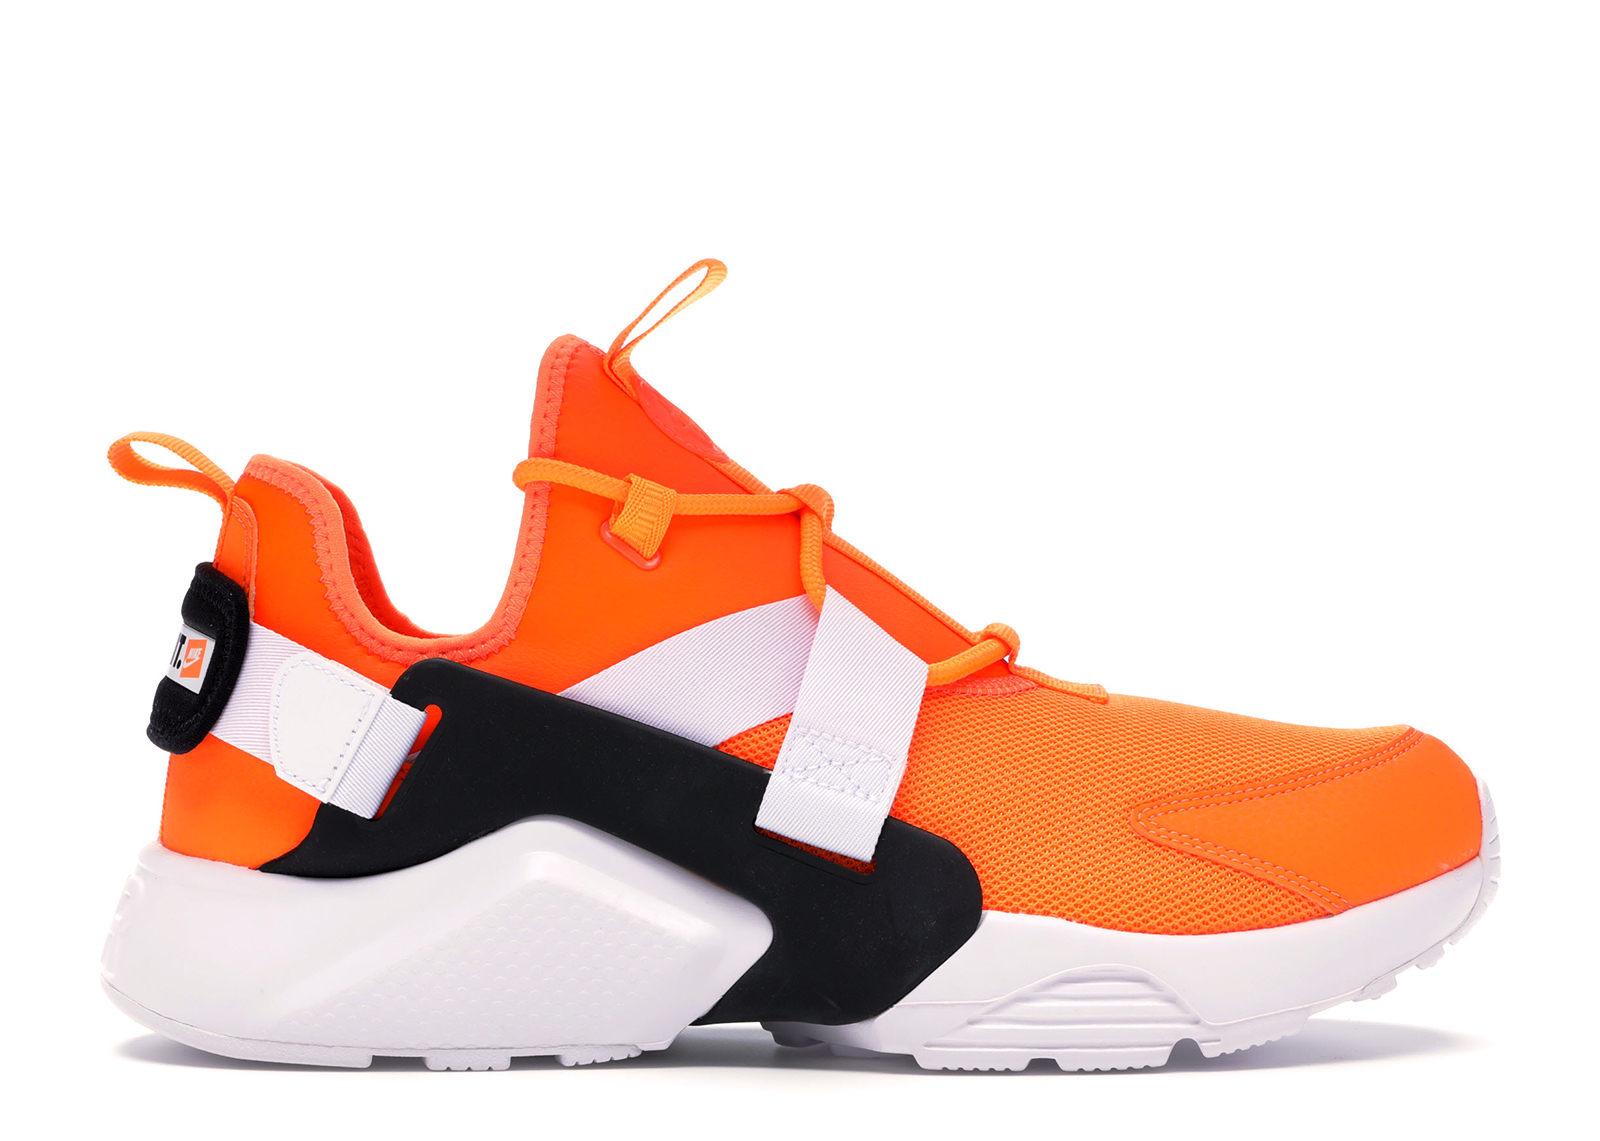 nike just do it huaraches